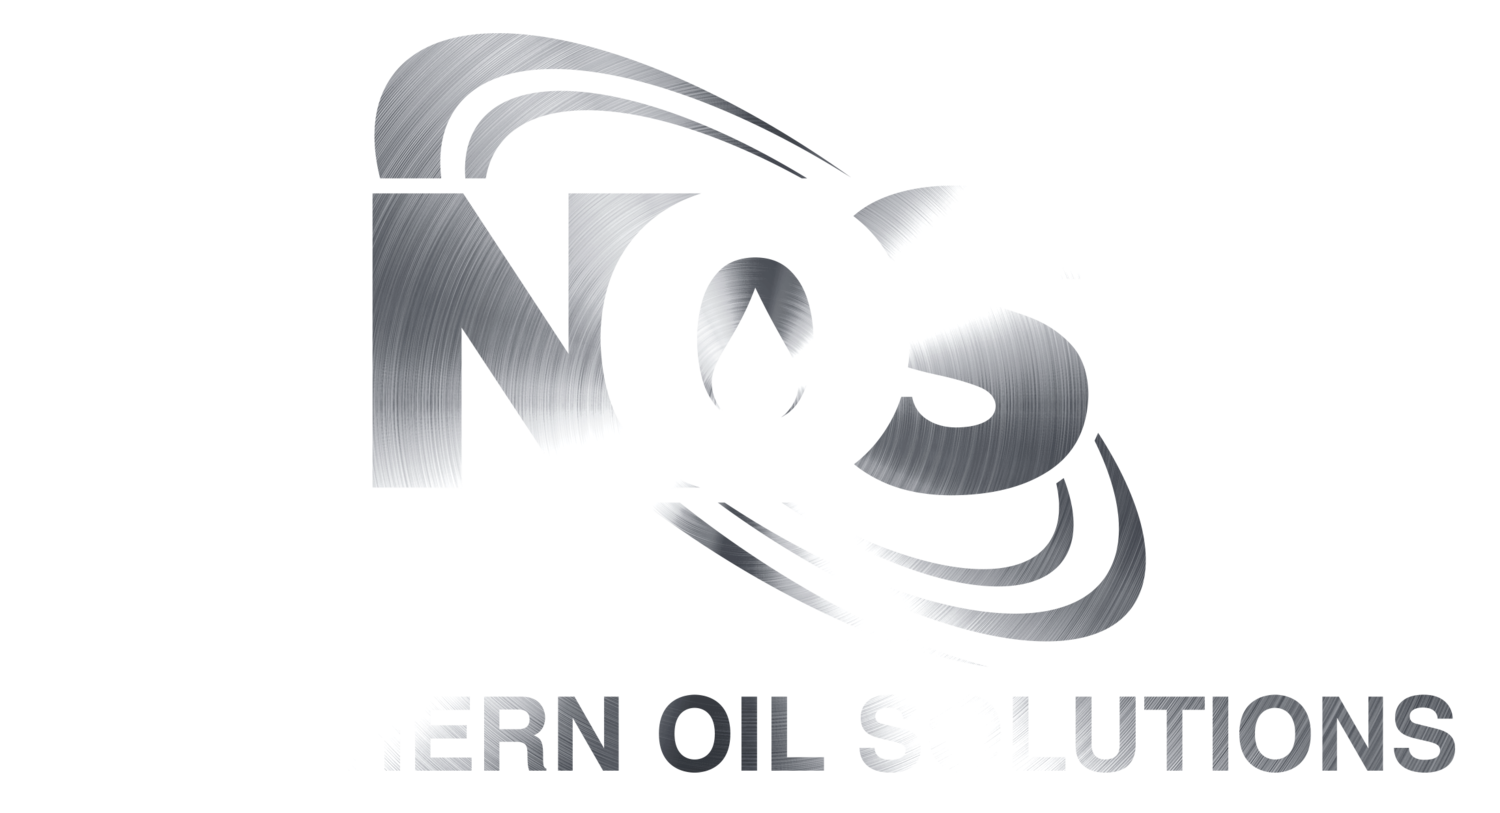 Northern Oil Solutions